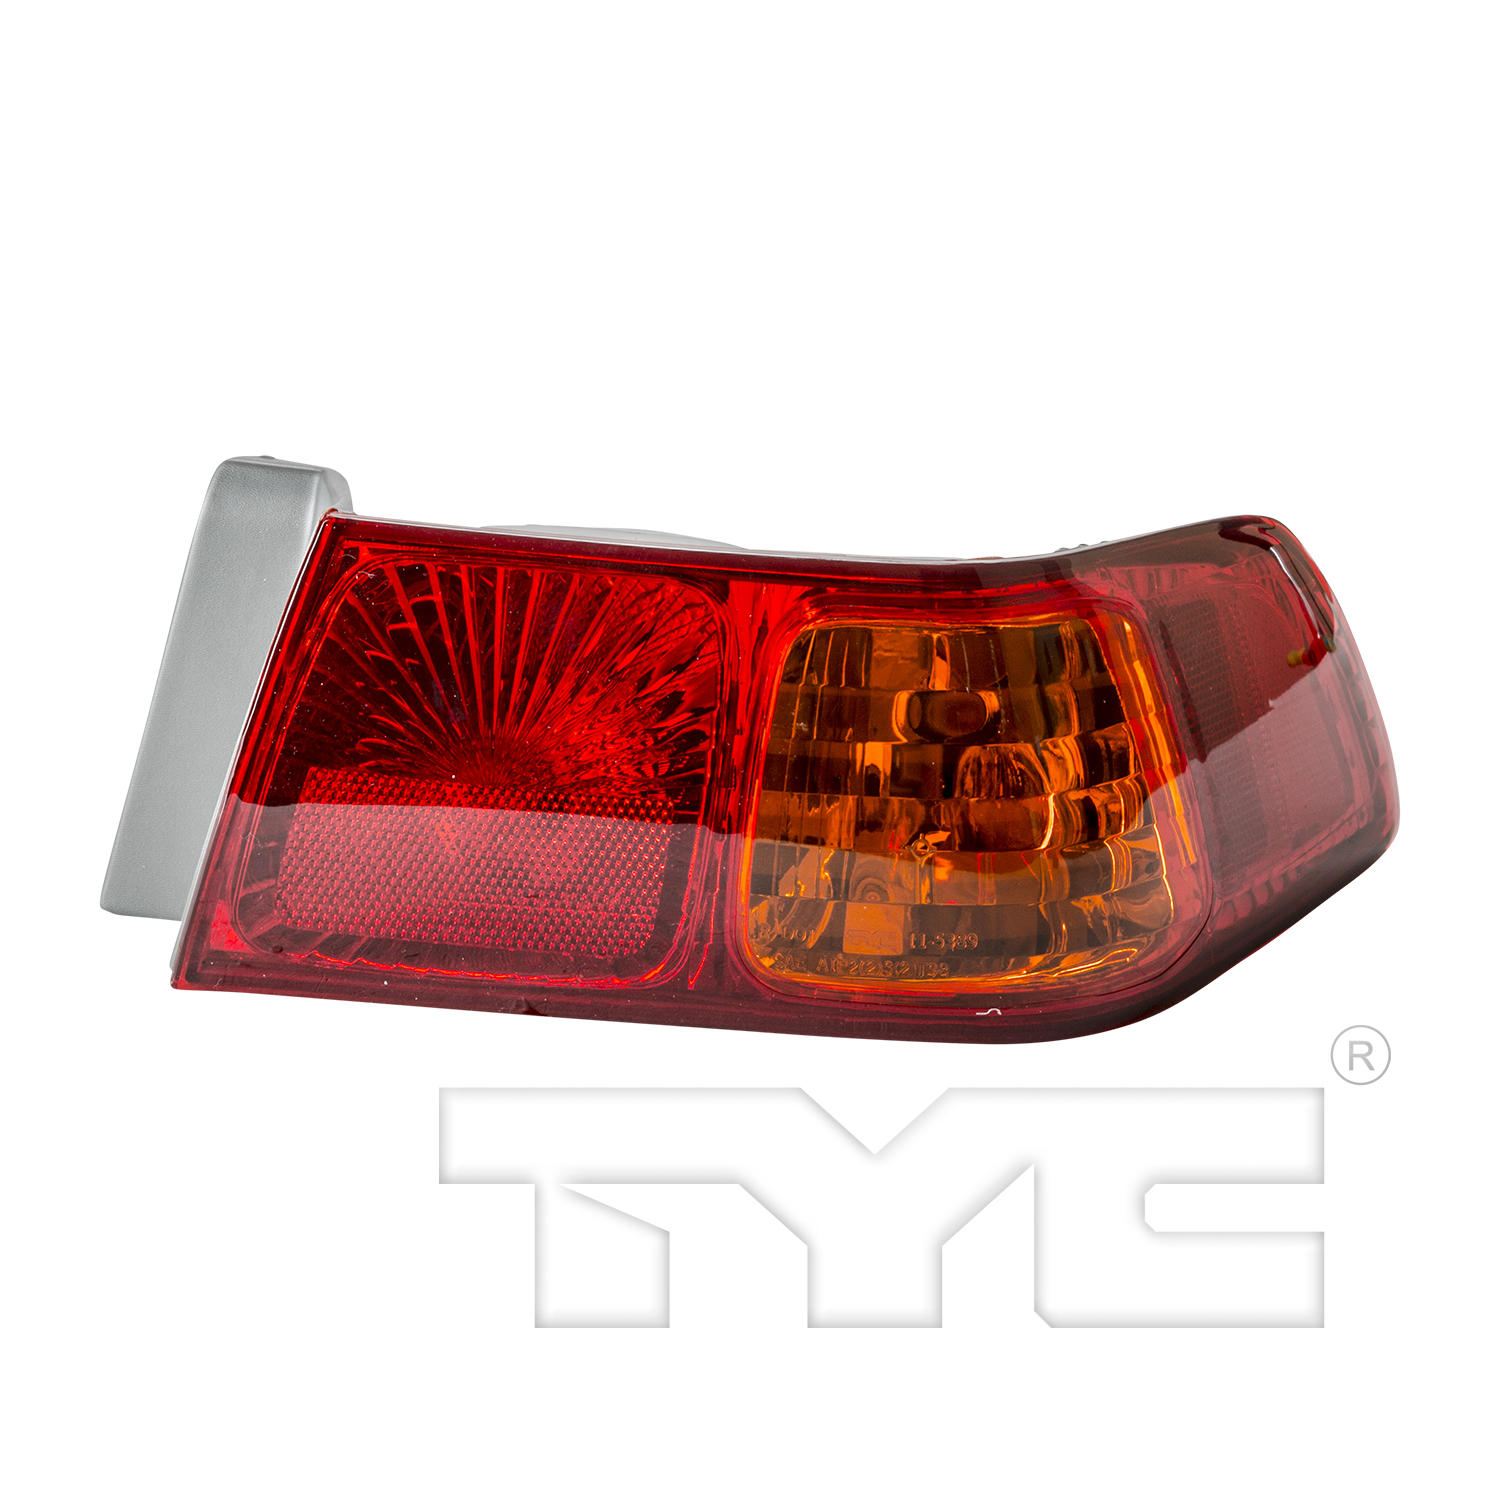 Aftermarket TAILLIGHTS for TOYOTA - CAMRY, CAMRY,00-01,RT Taillamp assy